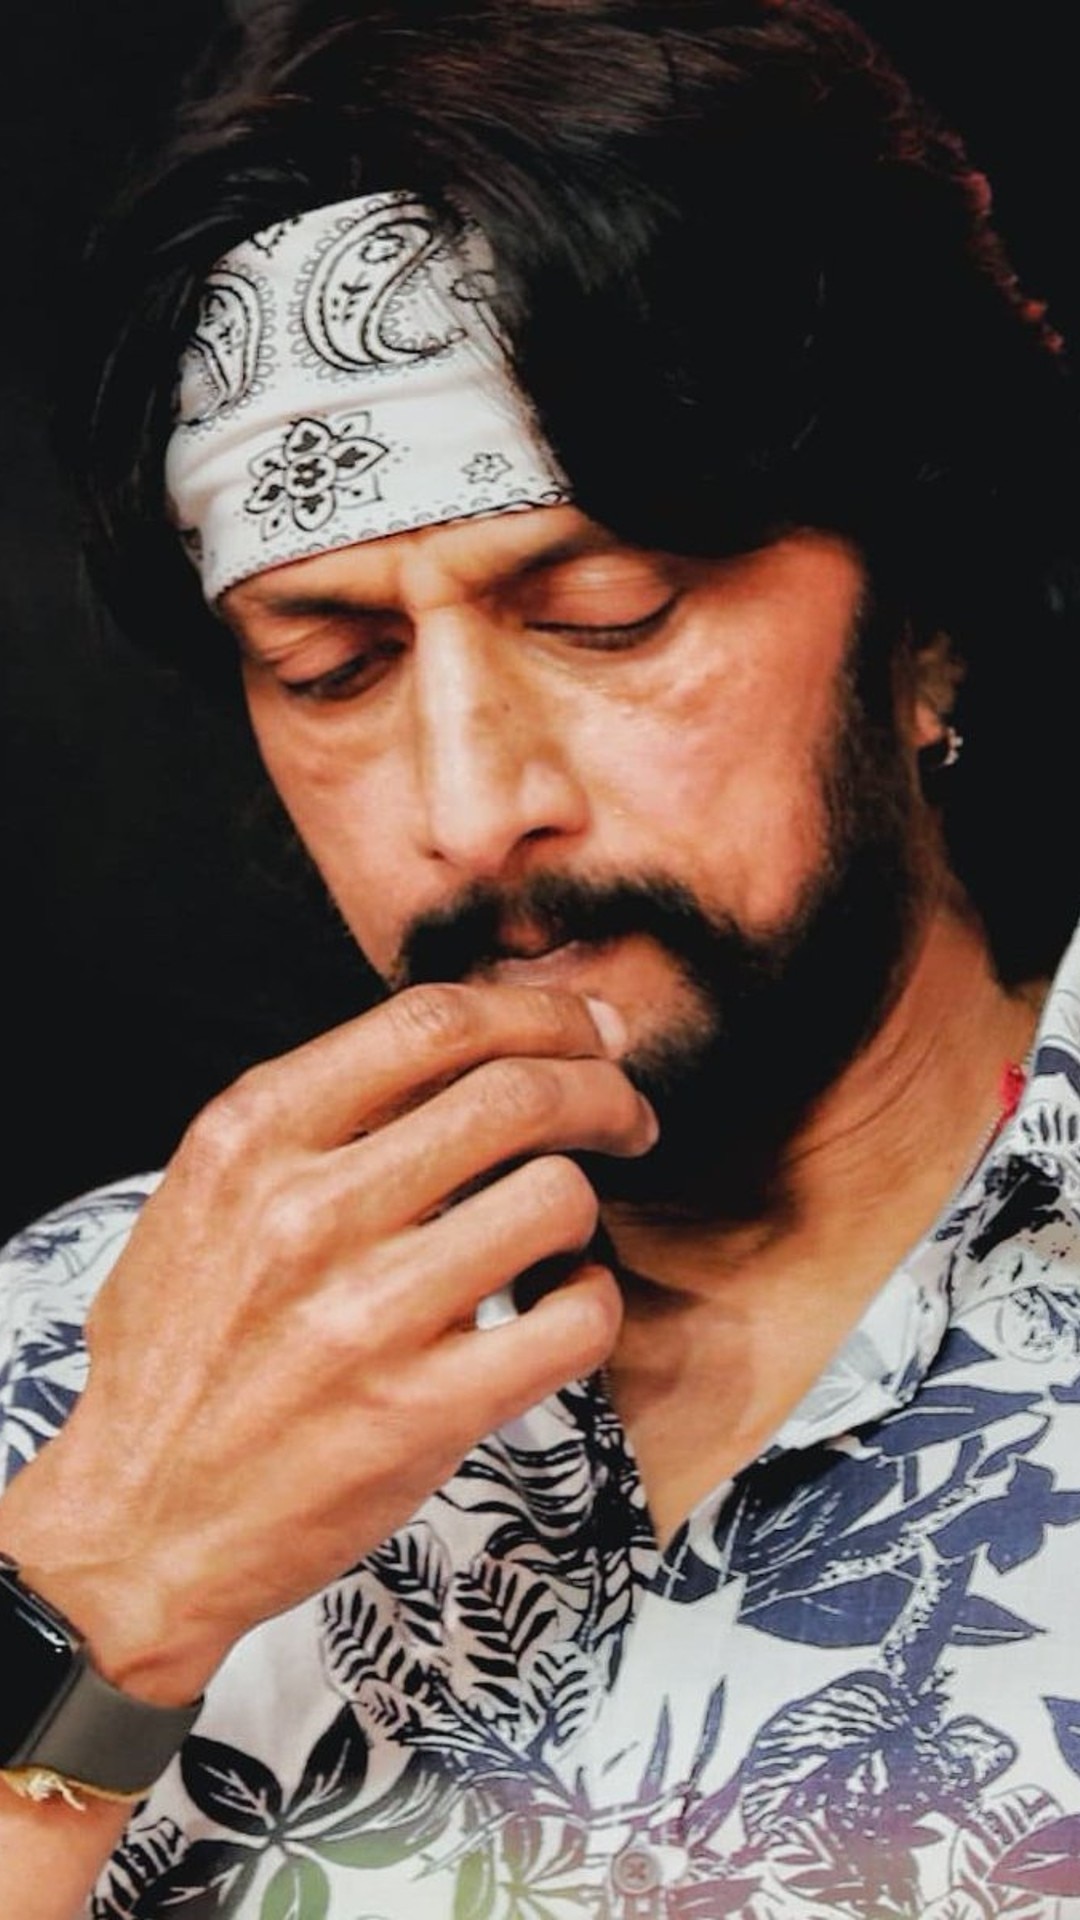 Kichaa sudeep sir kada available in 925 pure SILVER for more information  pls contact us 9035104440  Instagram